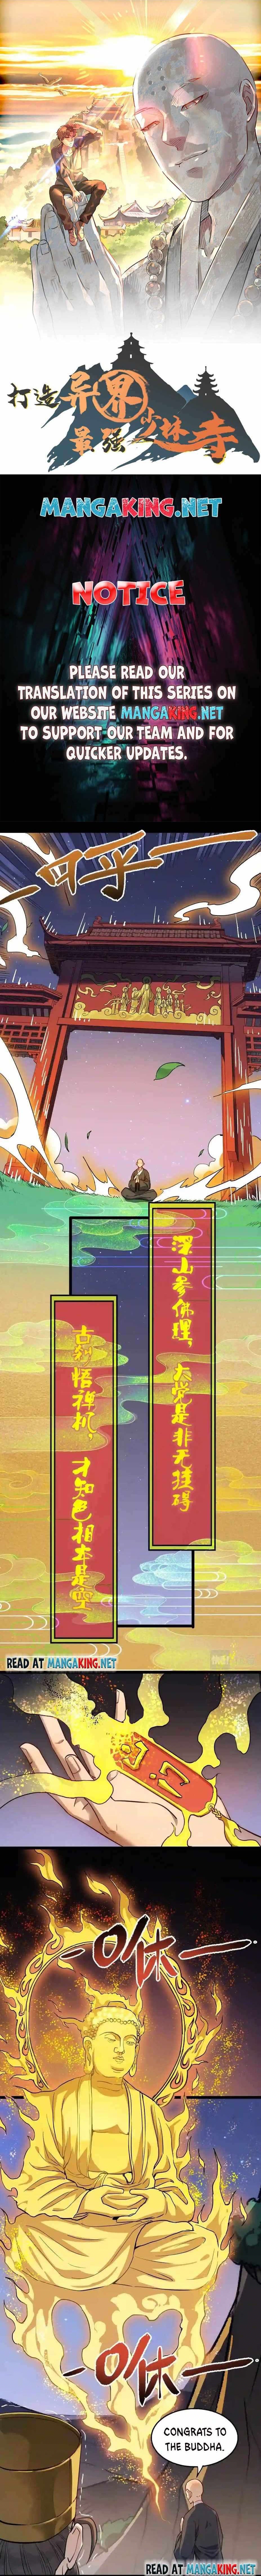 Building The Strongest Shaolin Temple In Another World - Page 1